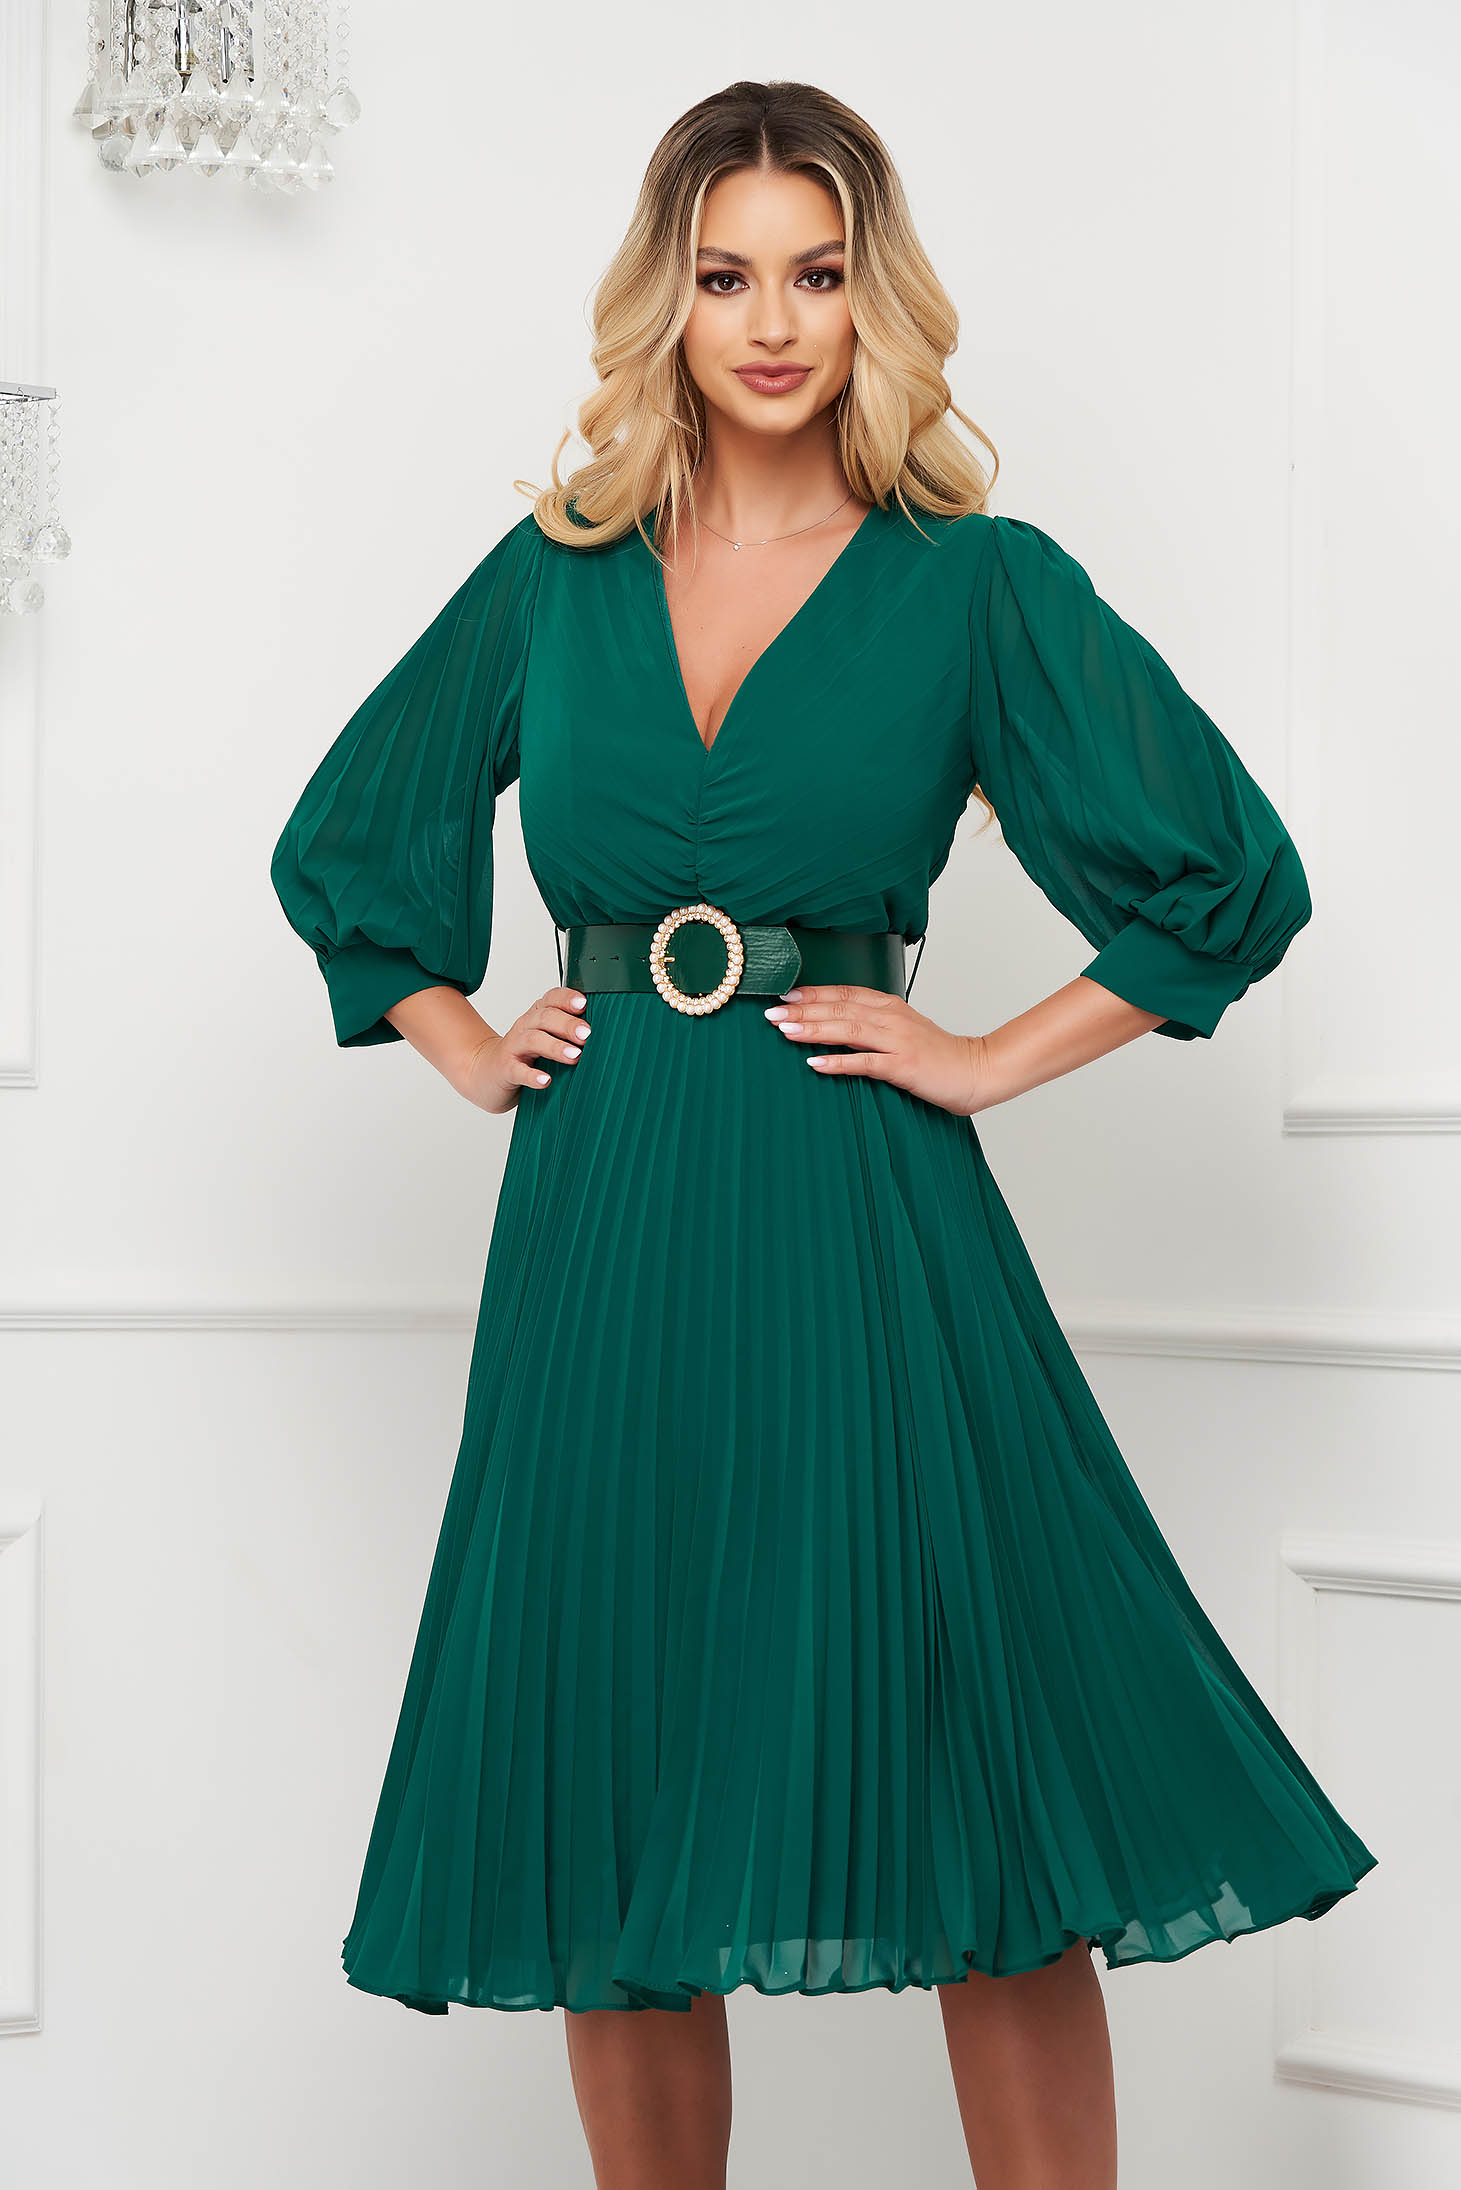 Green dress pleated from veil fabric midi cloche accessorized with belt